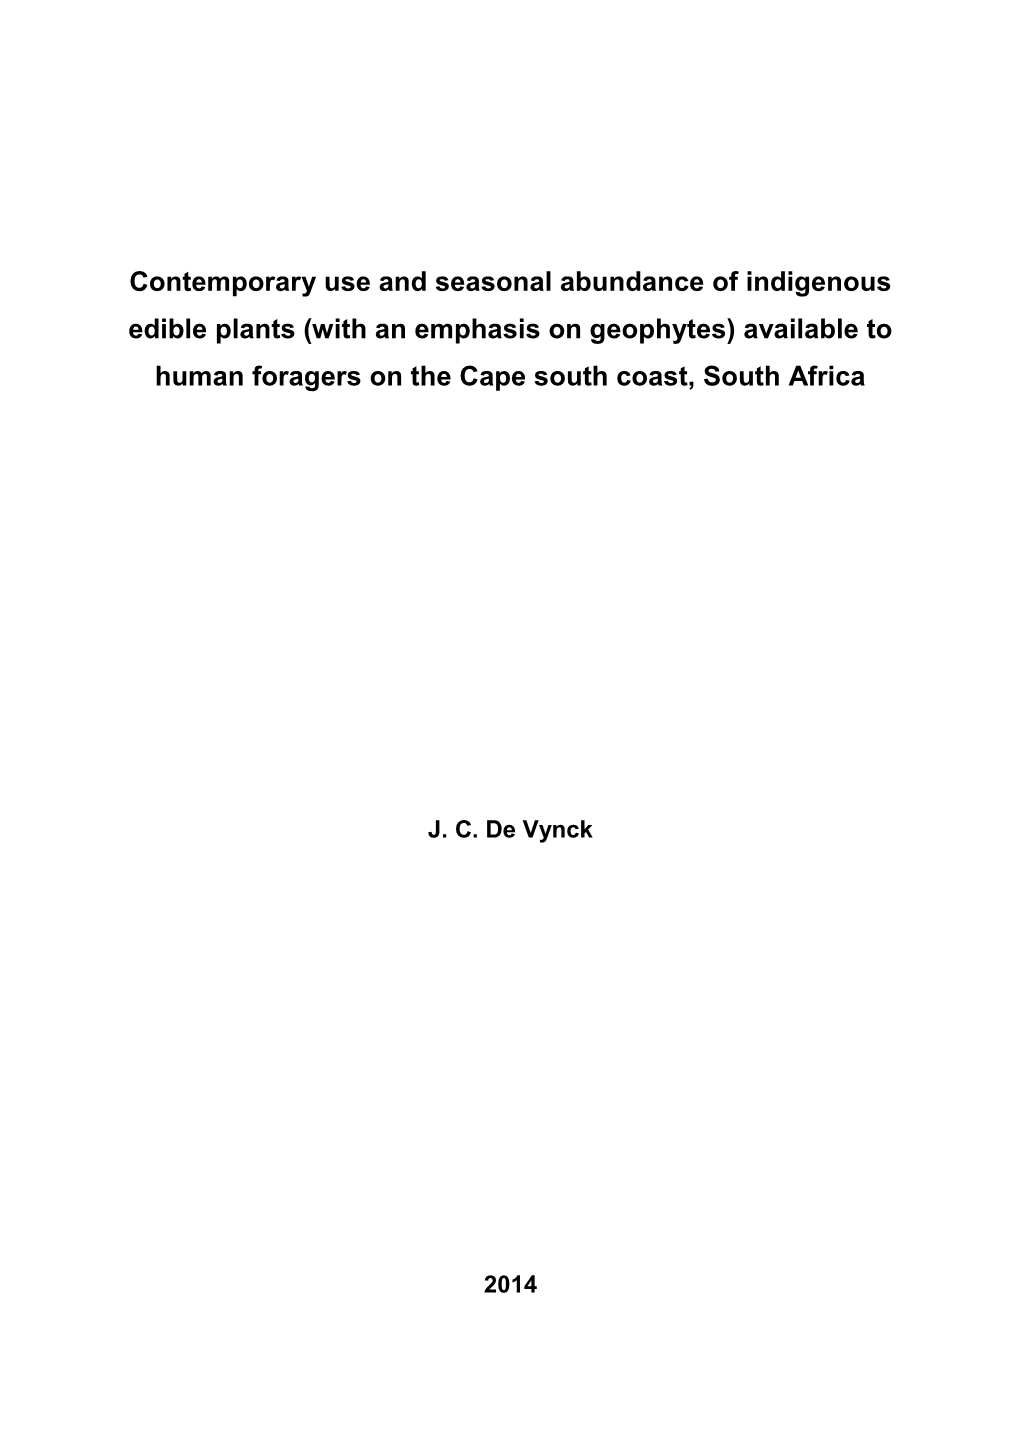 Contemporary Use and Seasonal Abundance of Indigenous Edible Plants (With an Emphasis on Geophytes) Available to Human Foragers on the Cape South Coast, South Africa